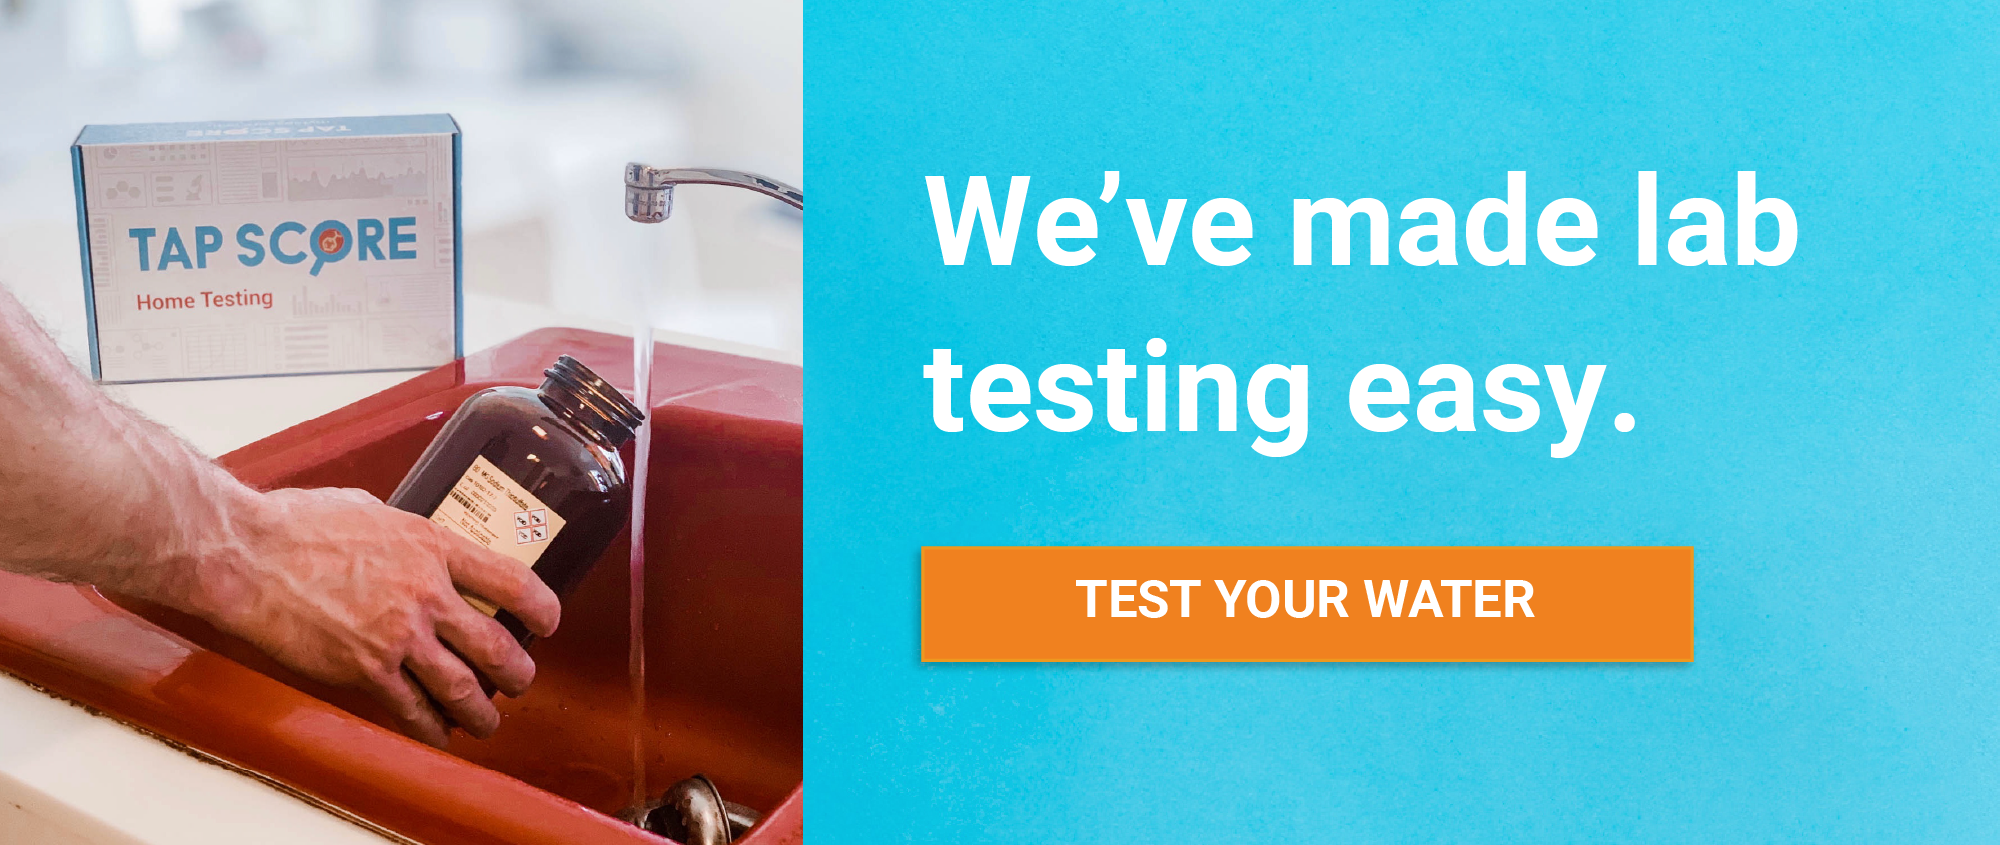 Test your water with Tap Score